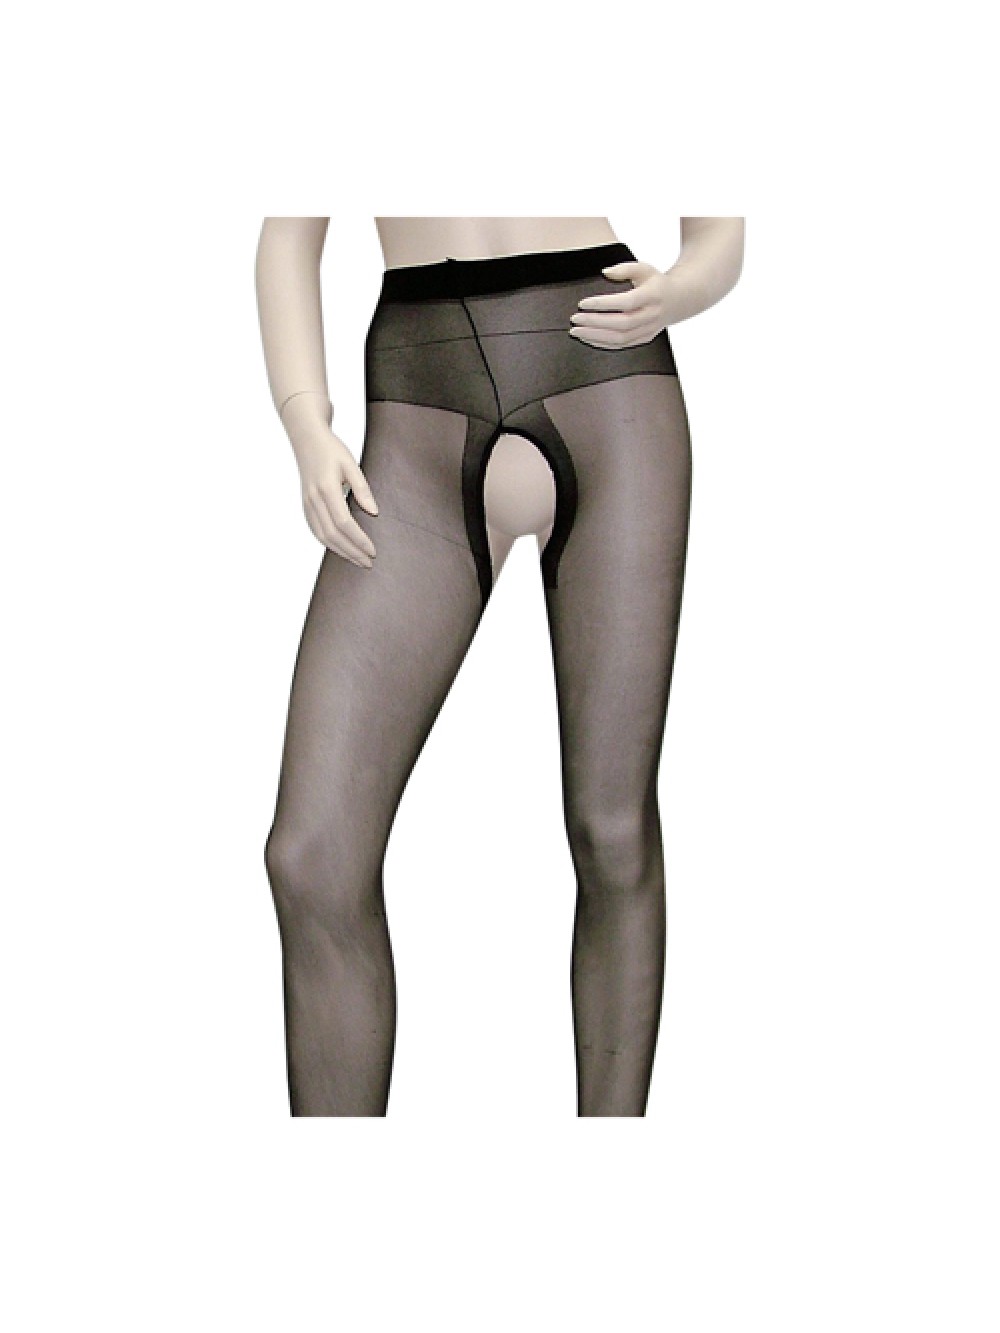 Crotchless Tights black 4024144044290